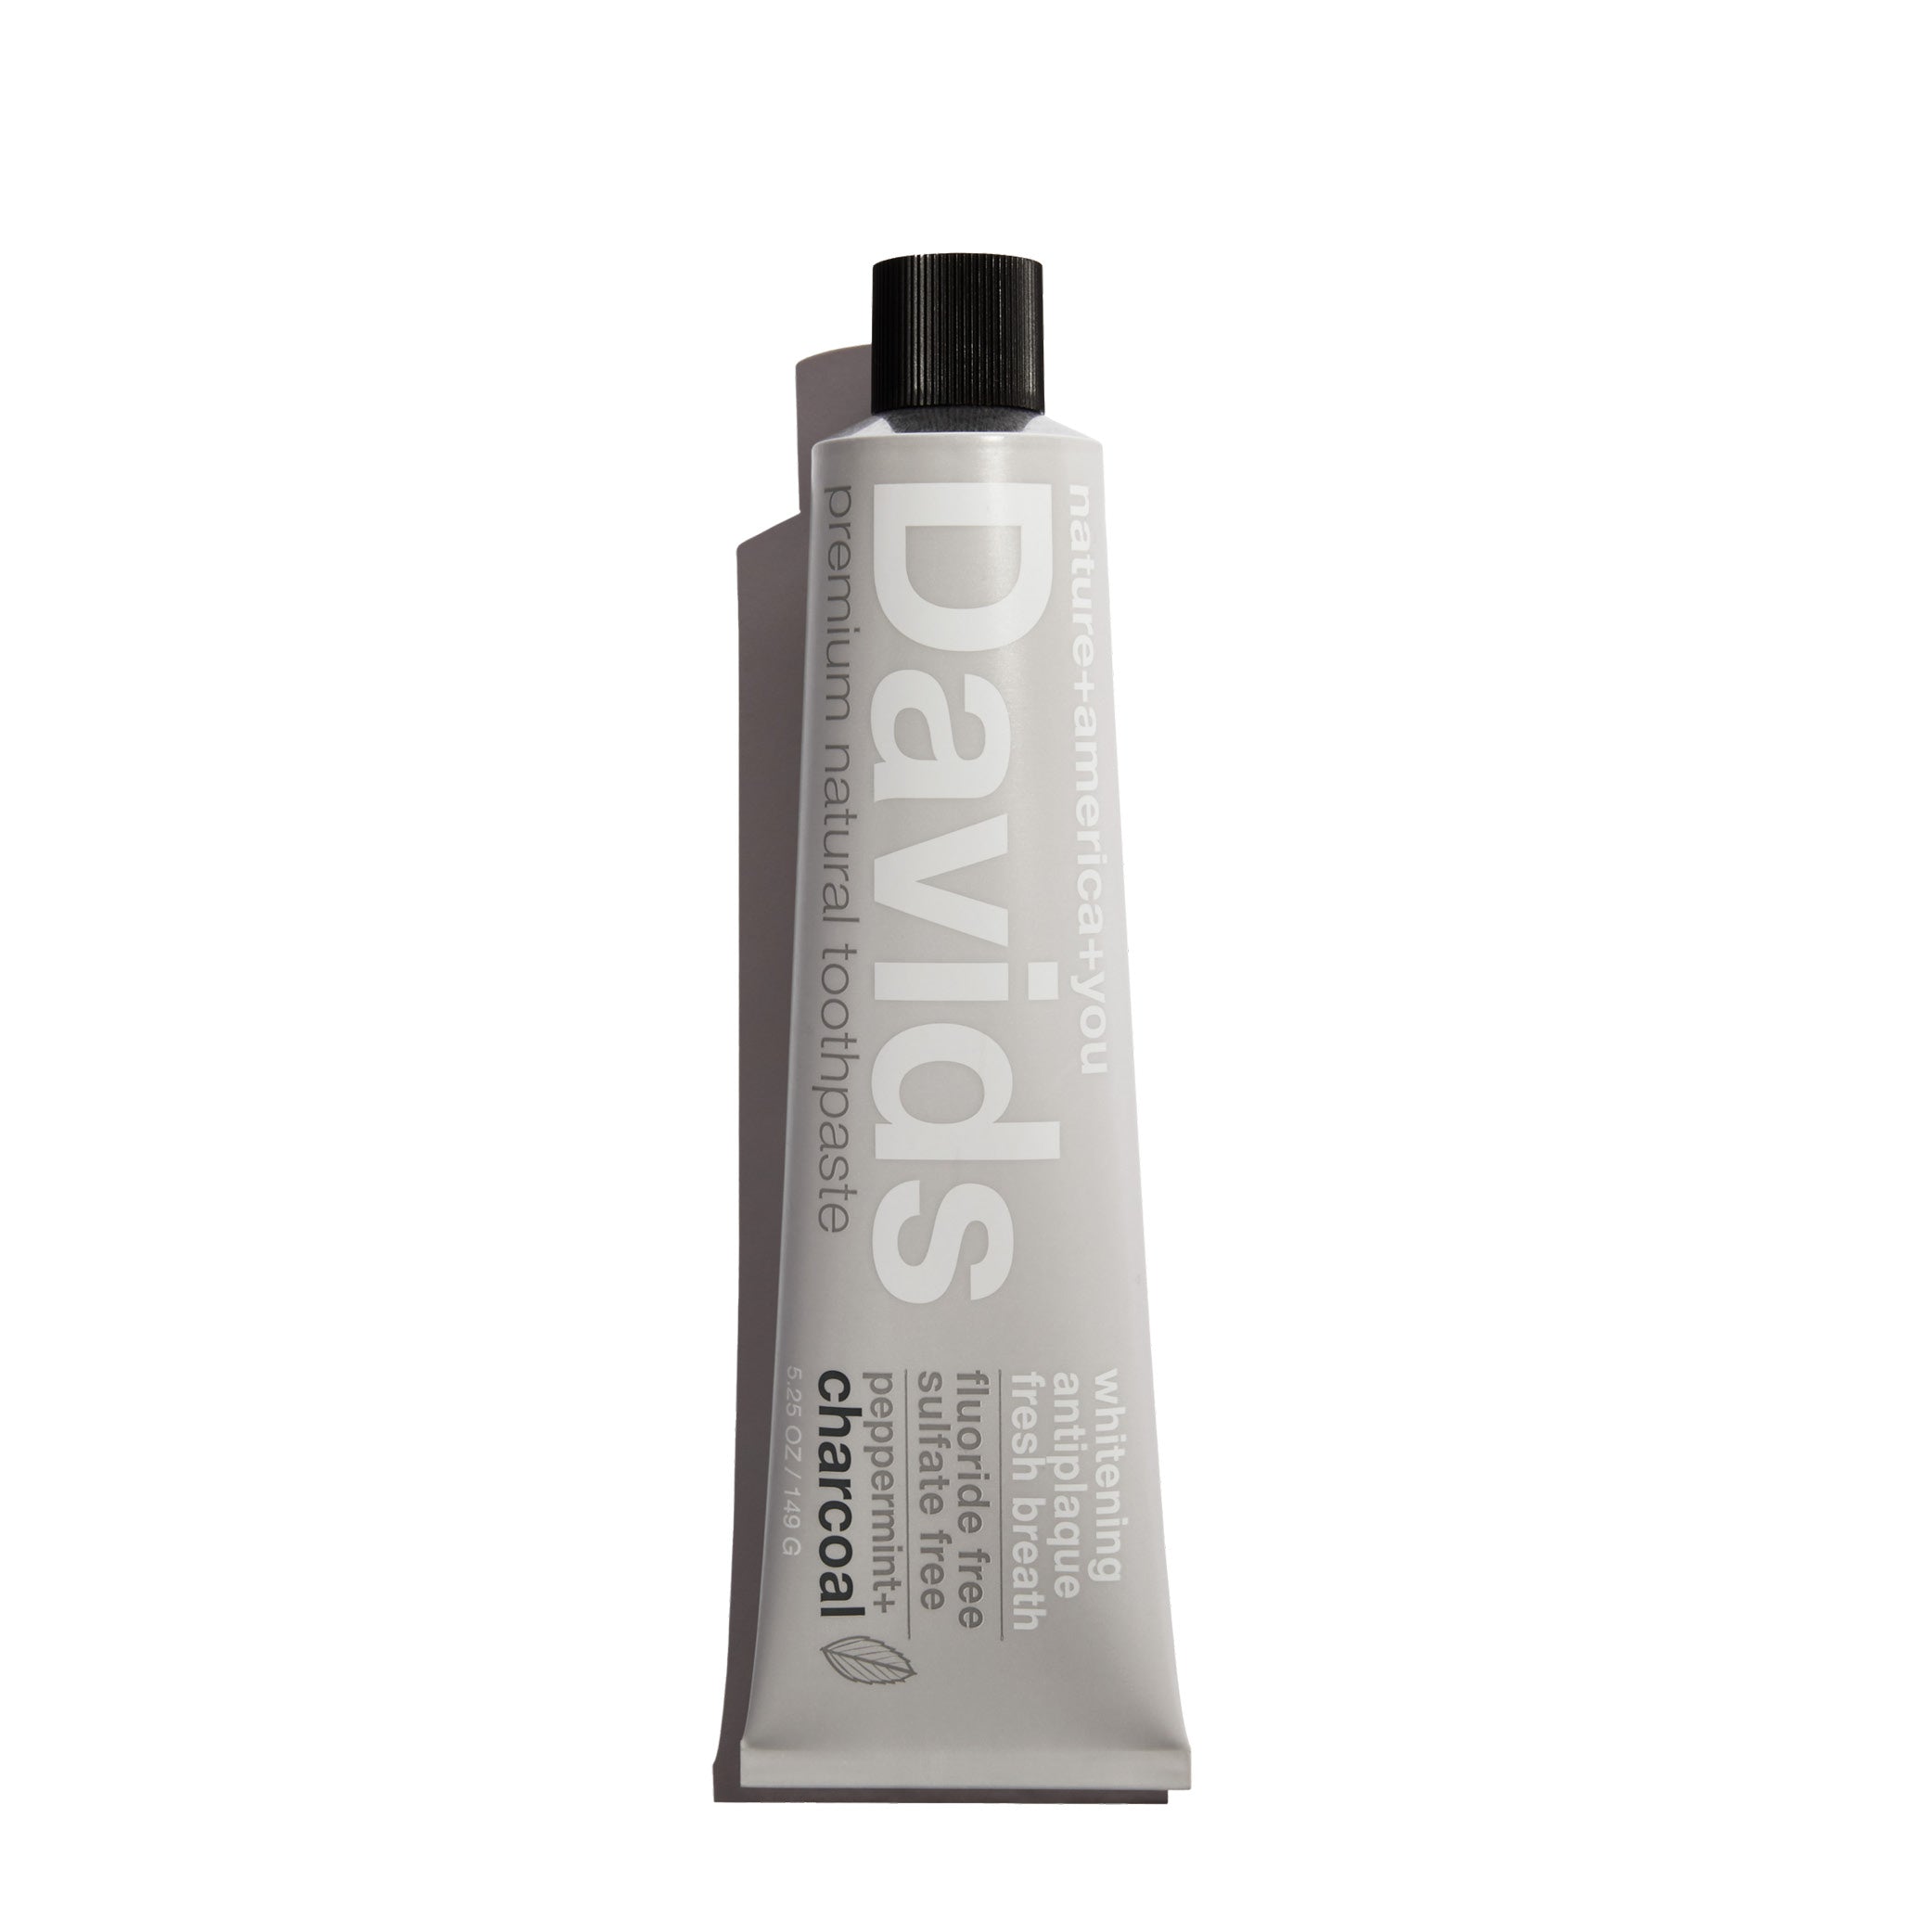 Davids Premium Toothpaste / Charcoal+Peppermint